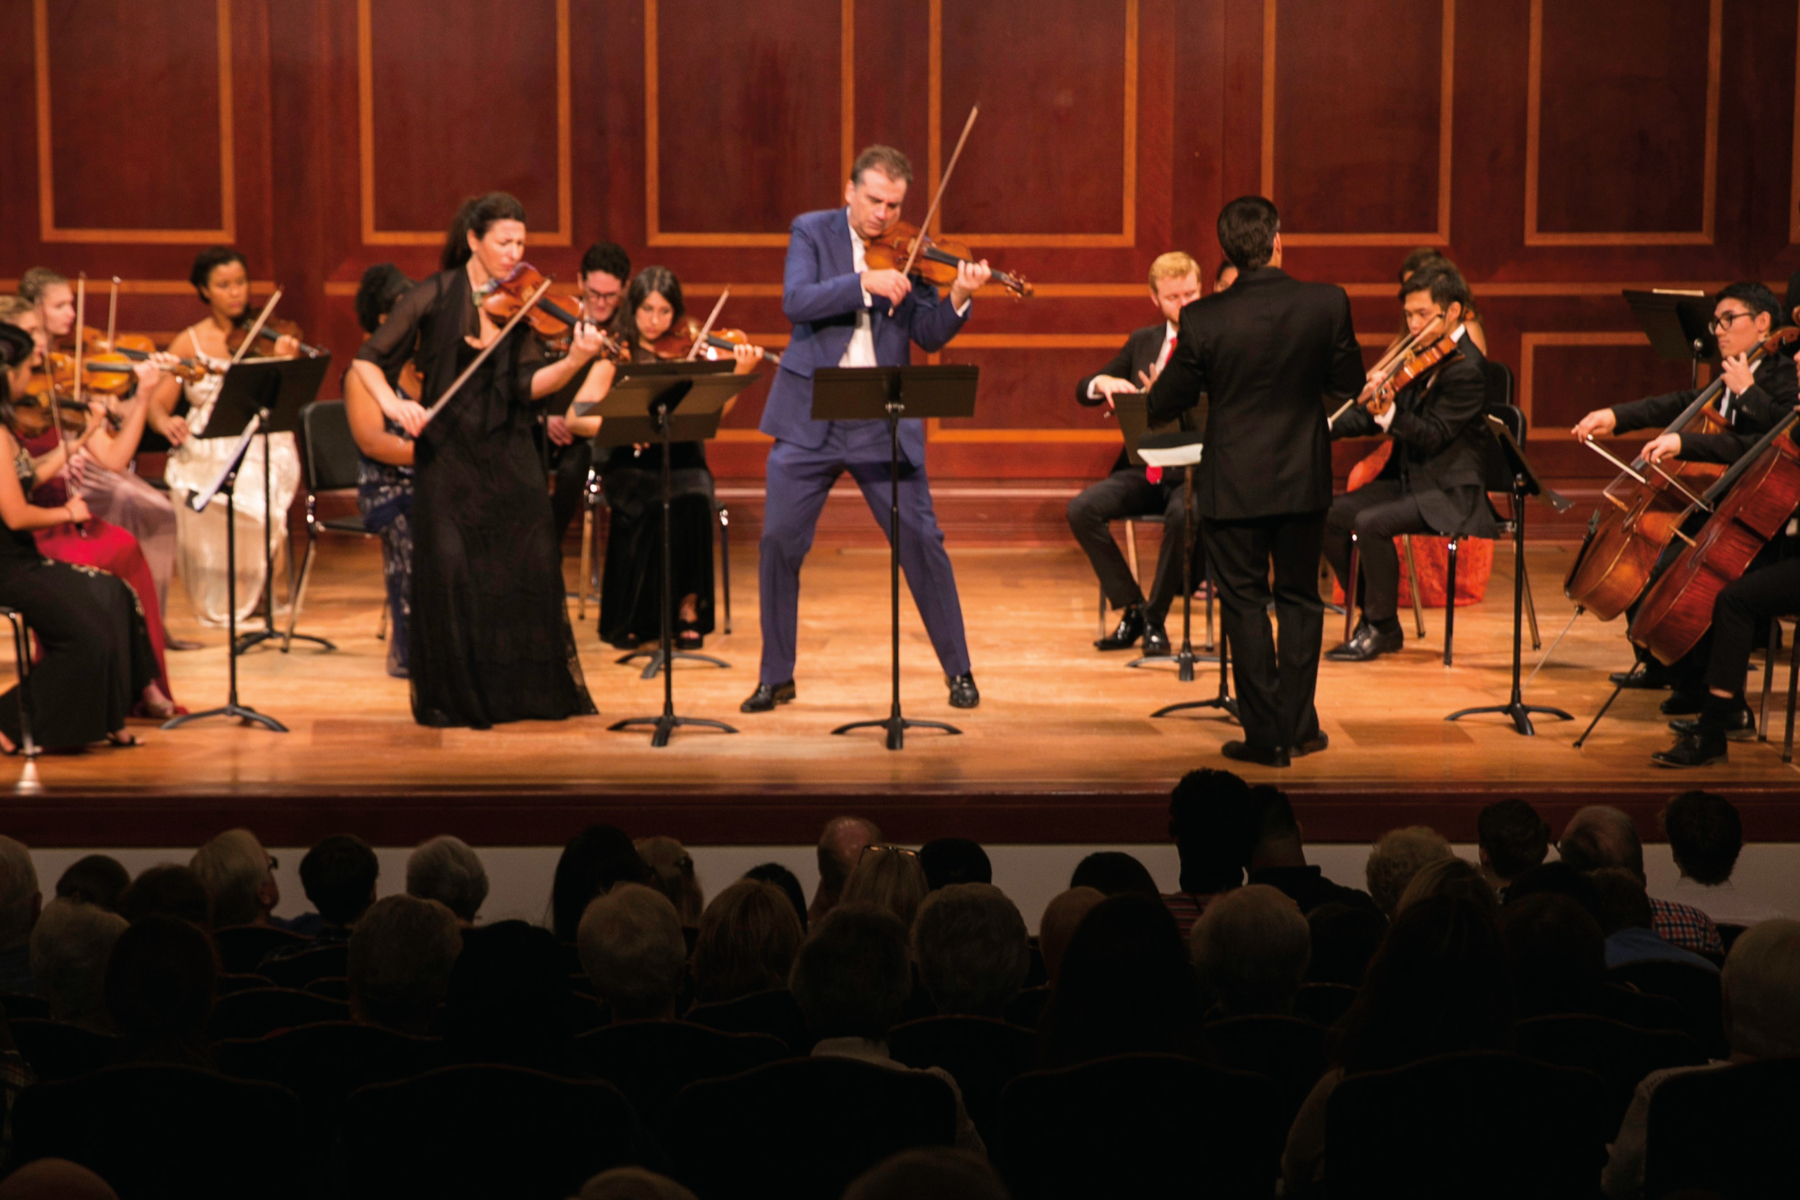 strings players perform on stage in front of an audience